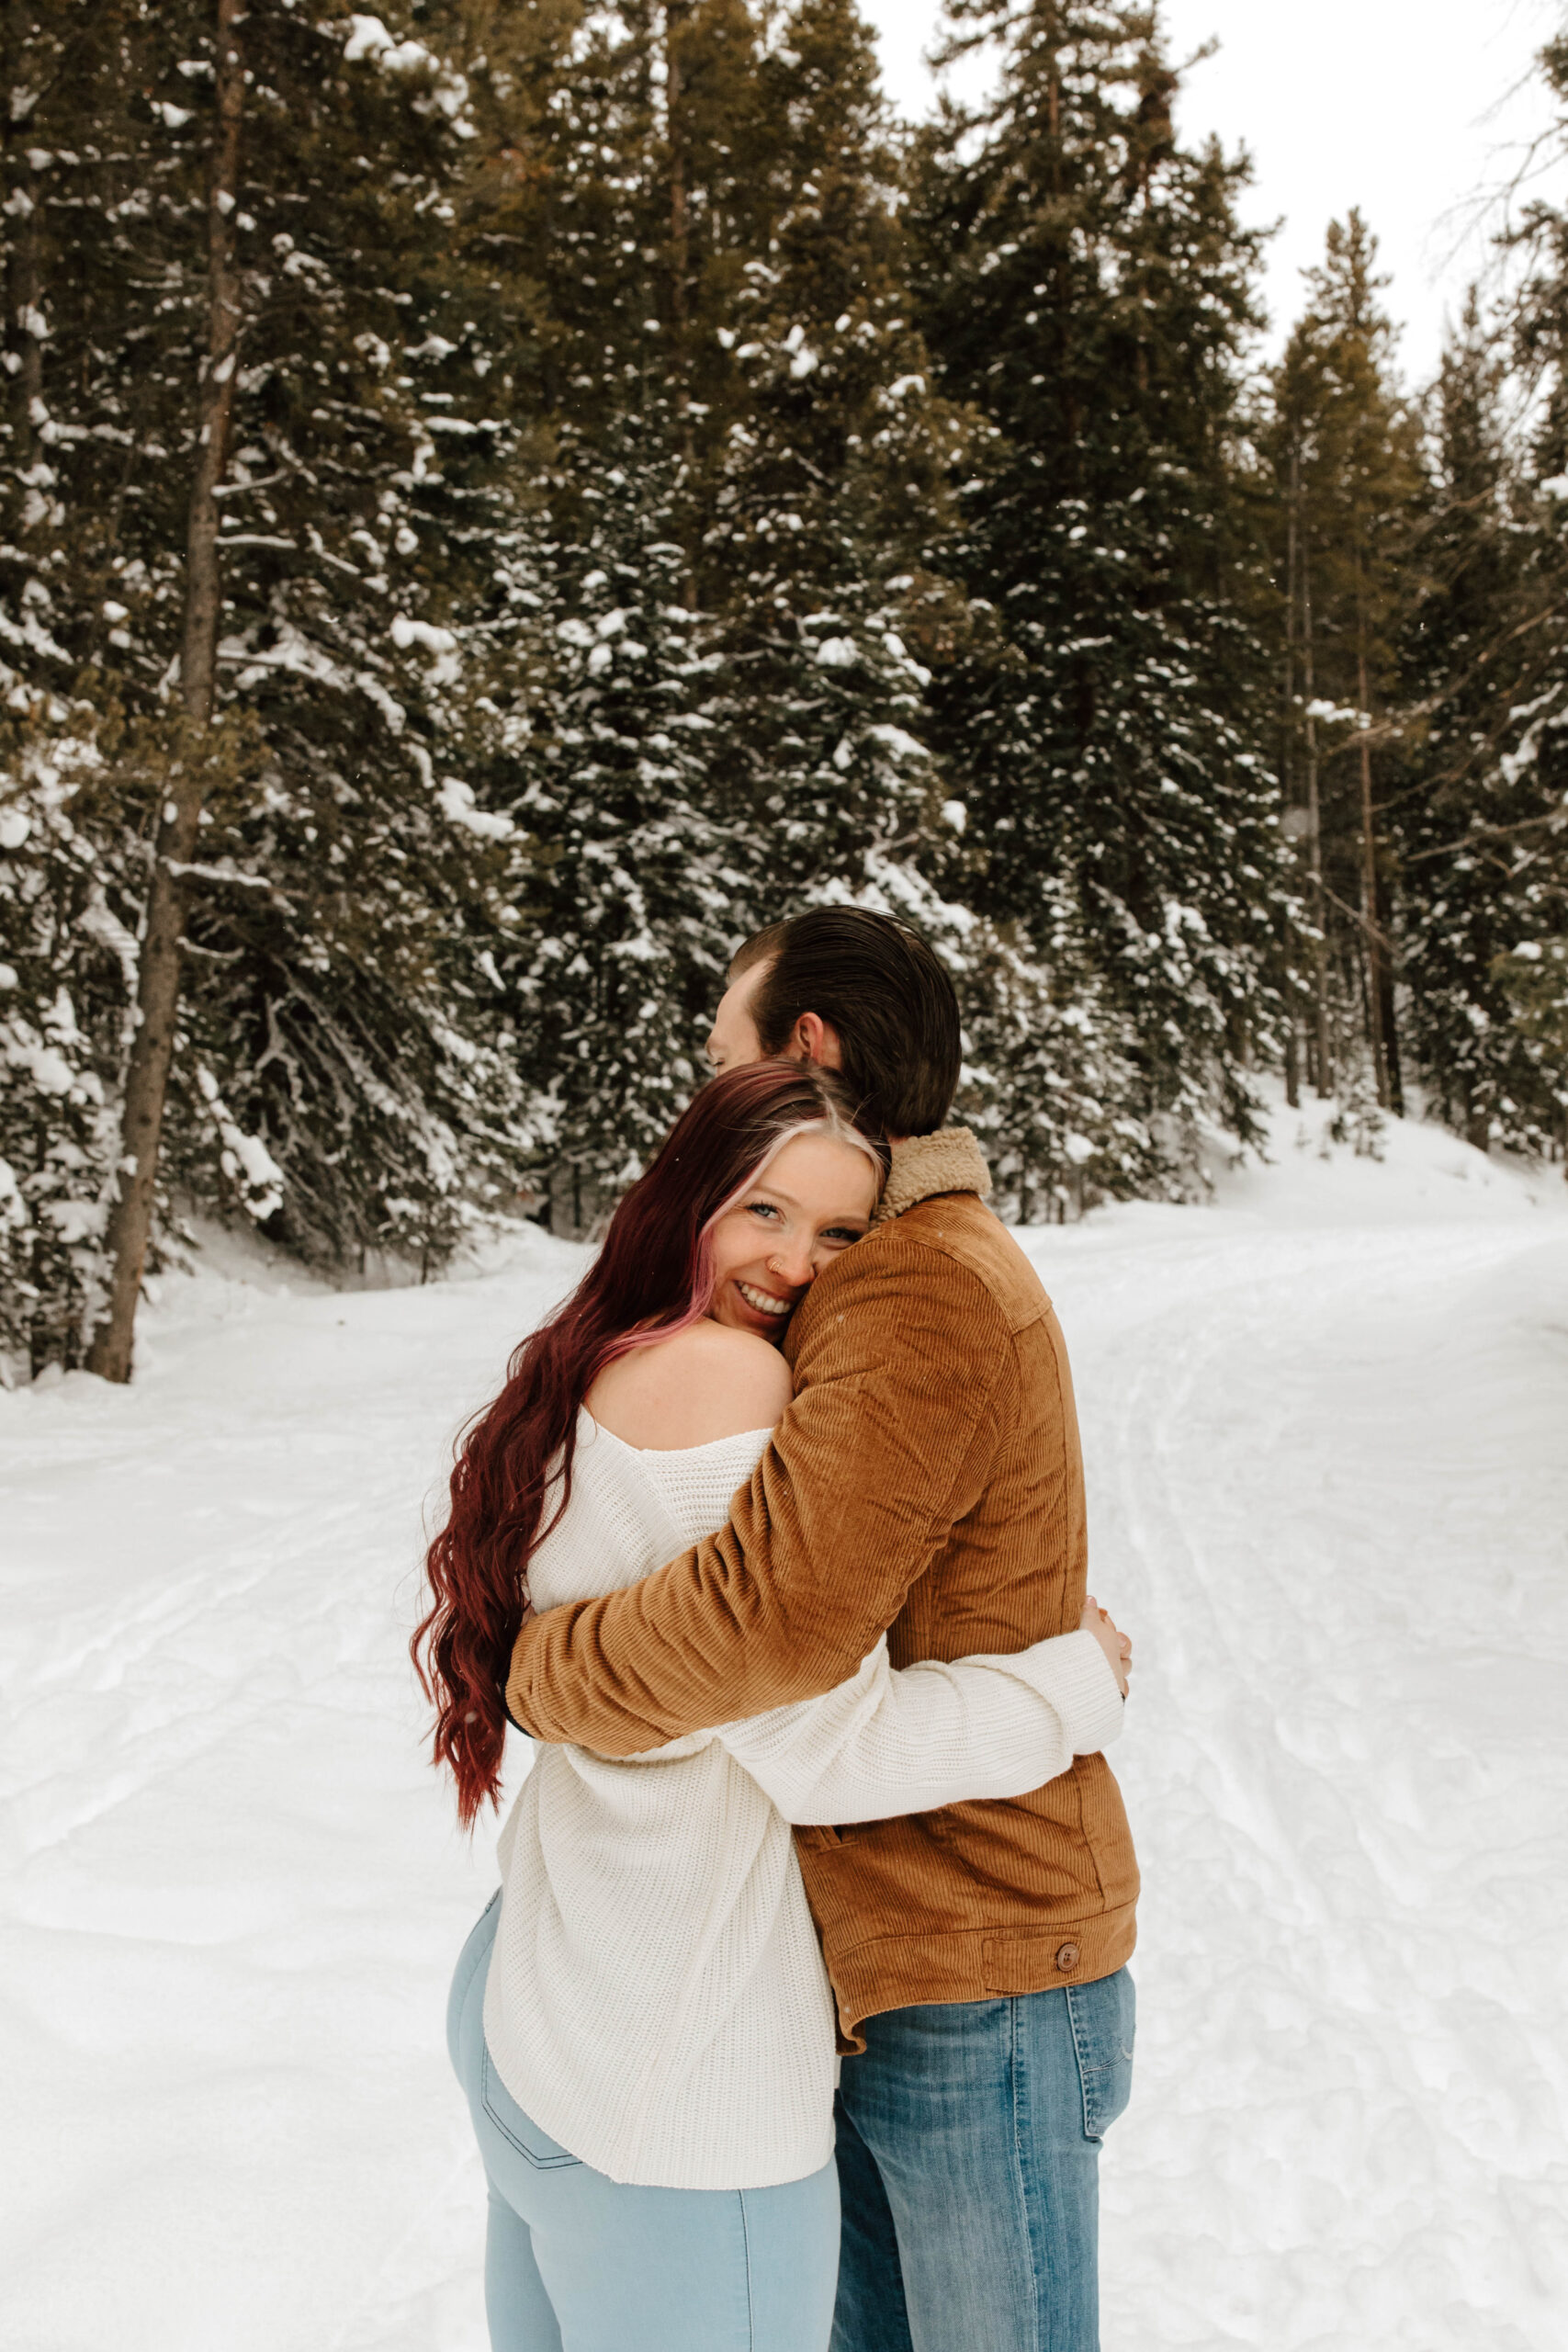 couple hugs, and she smiles at the camera. they are surrounded by snow and tall evergreen trees.